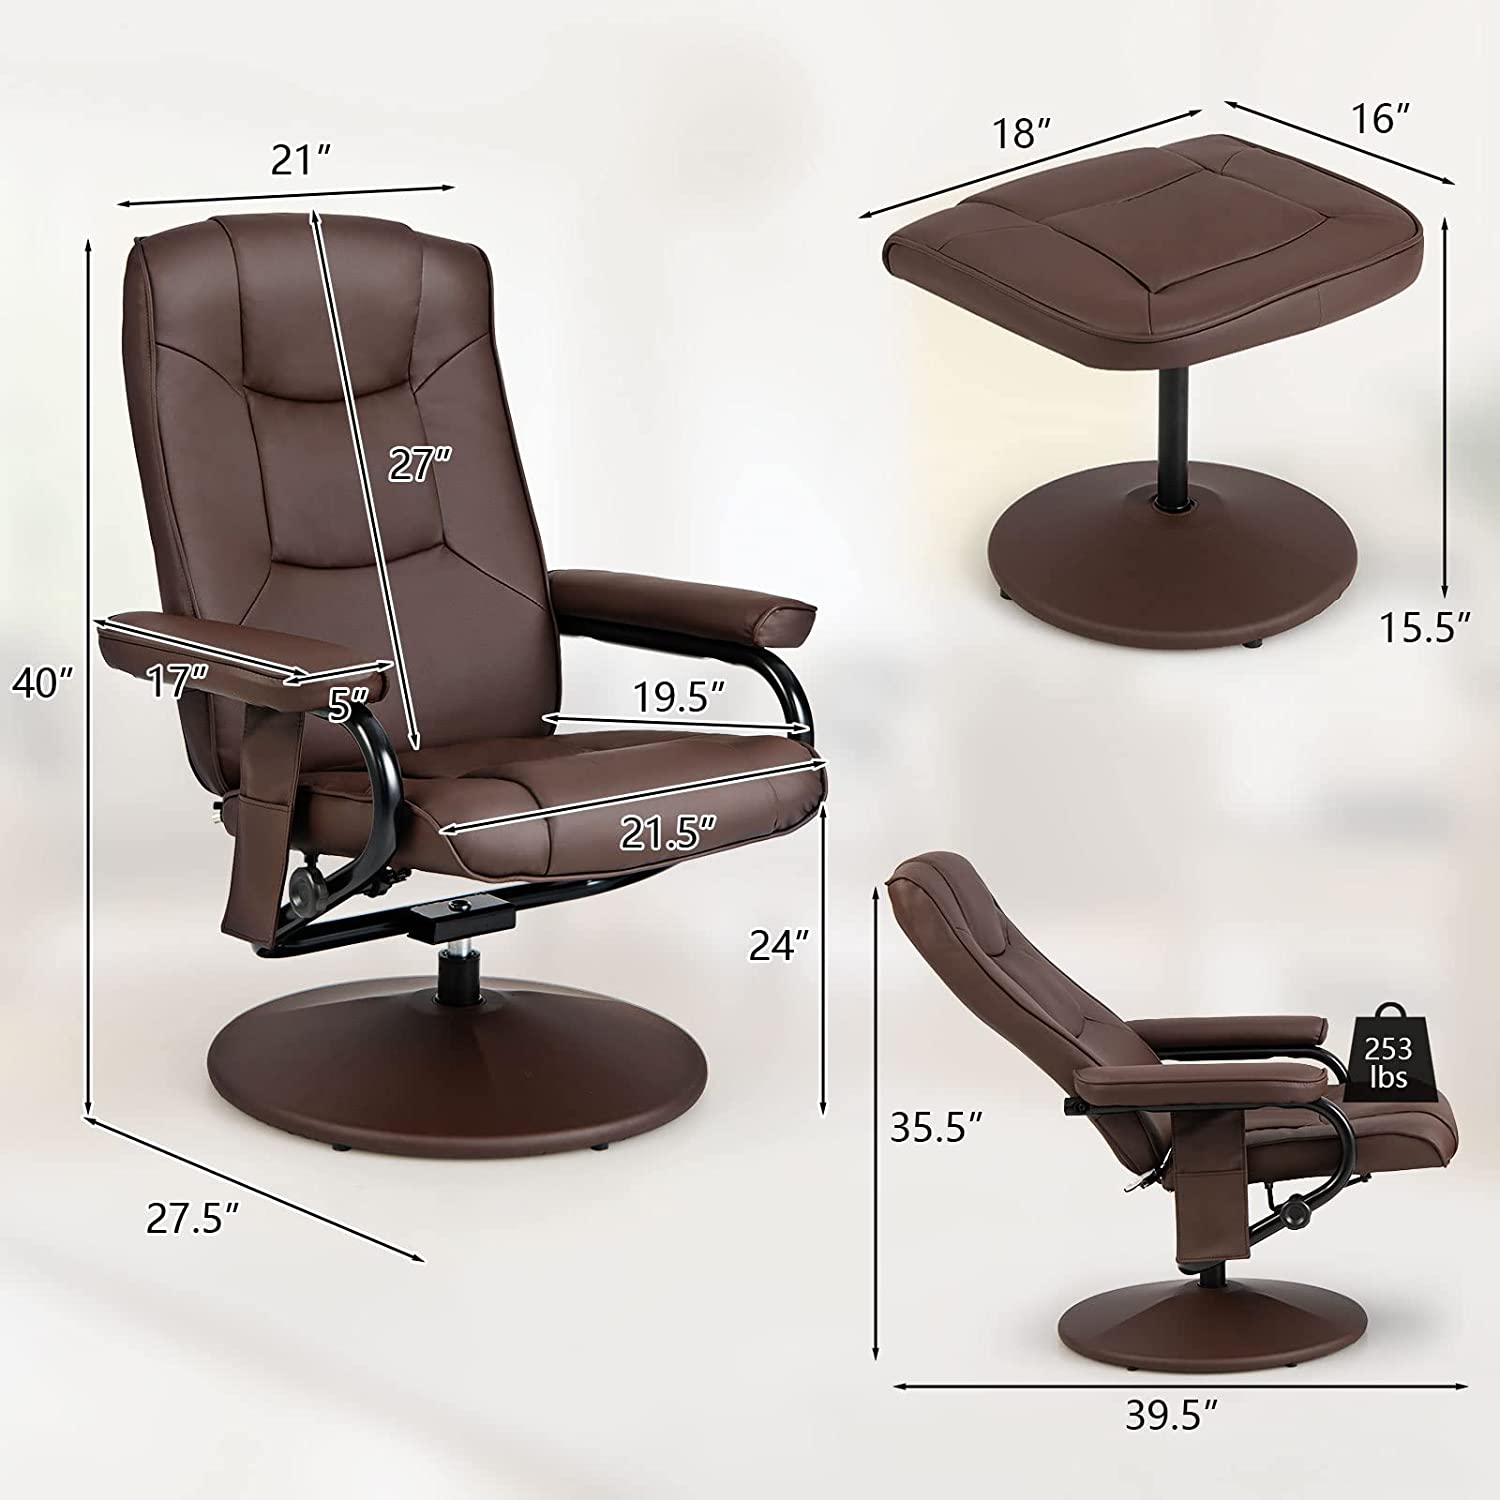 Chairliving 360° Swivel Recliner Armchair Faux Leather Massage Lounge Chair with Adjustable Backrest Remote Control